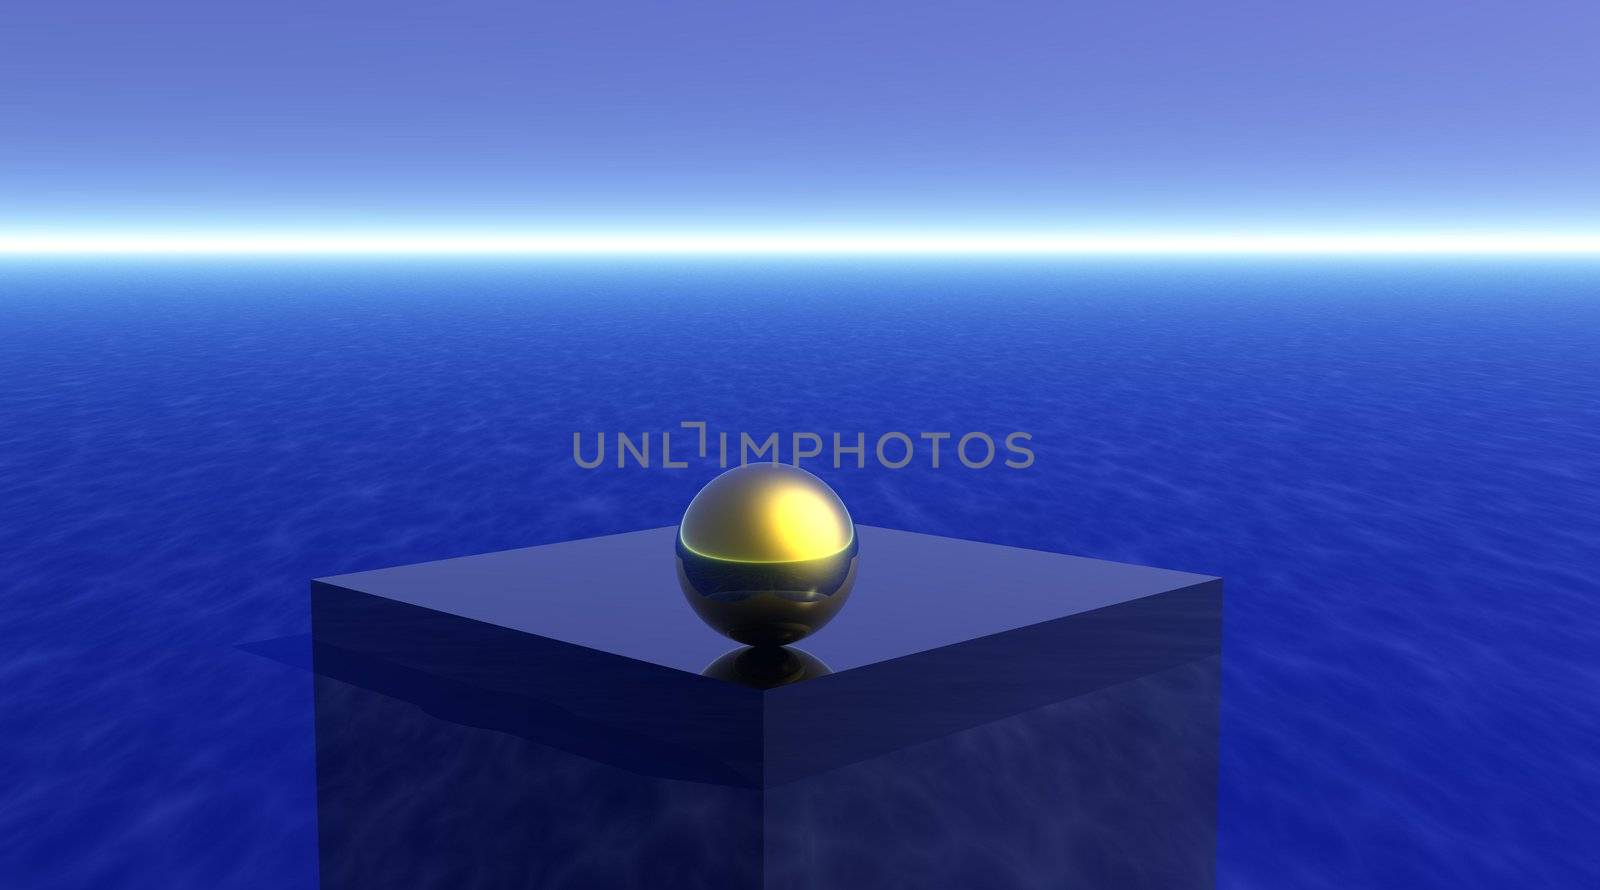 Shining and peacefull small gold ball alone on the face of a blue cube, in the deep blue sea and with a deep blue sky